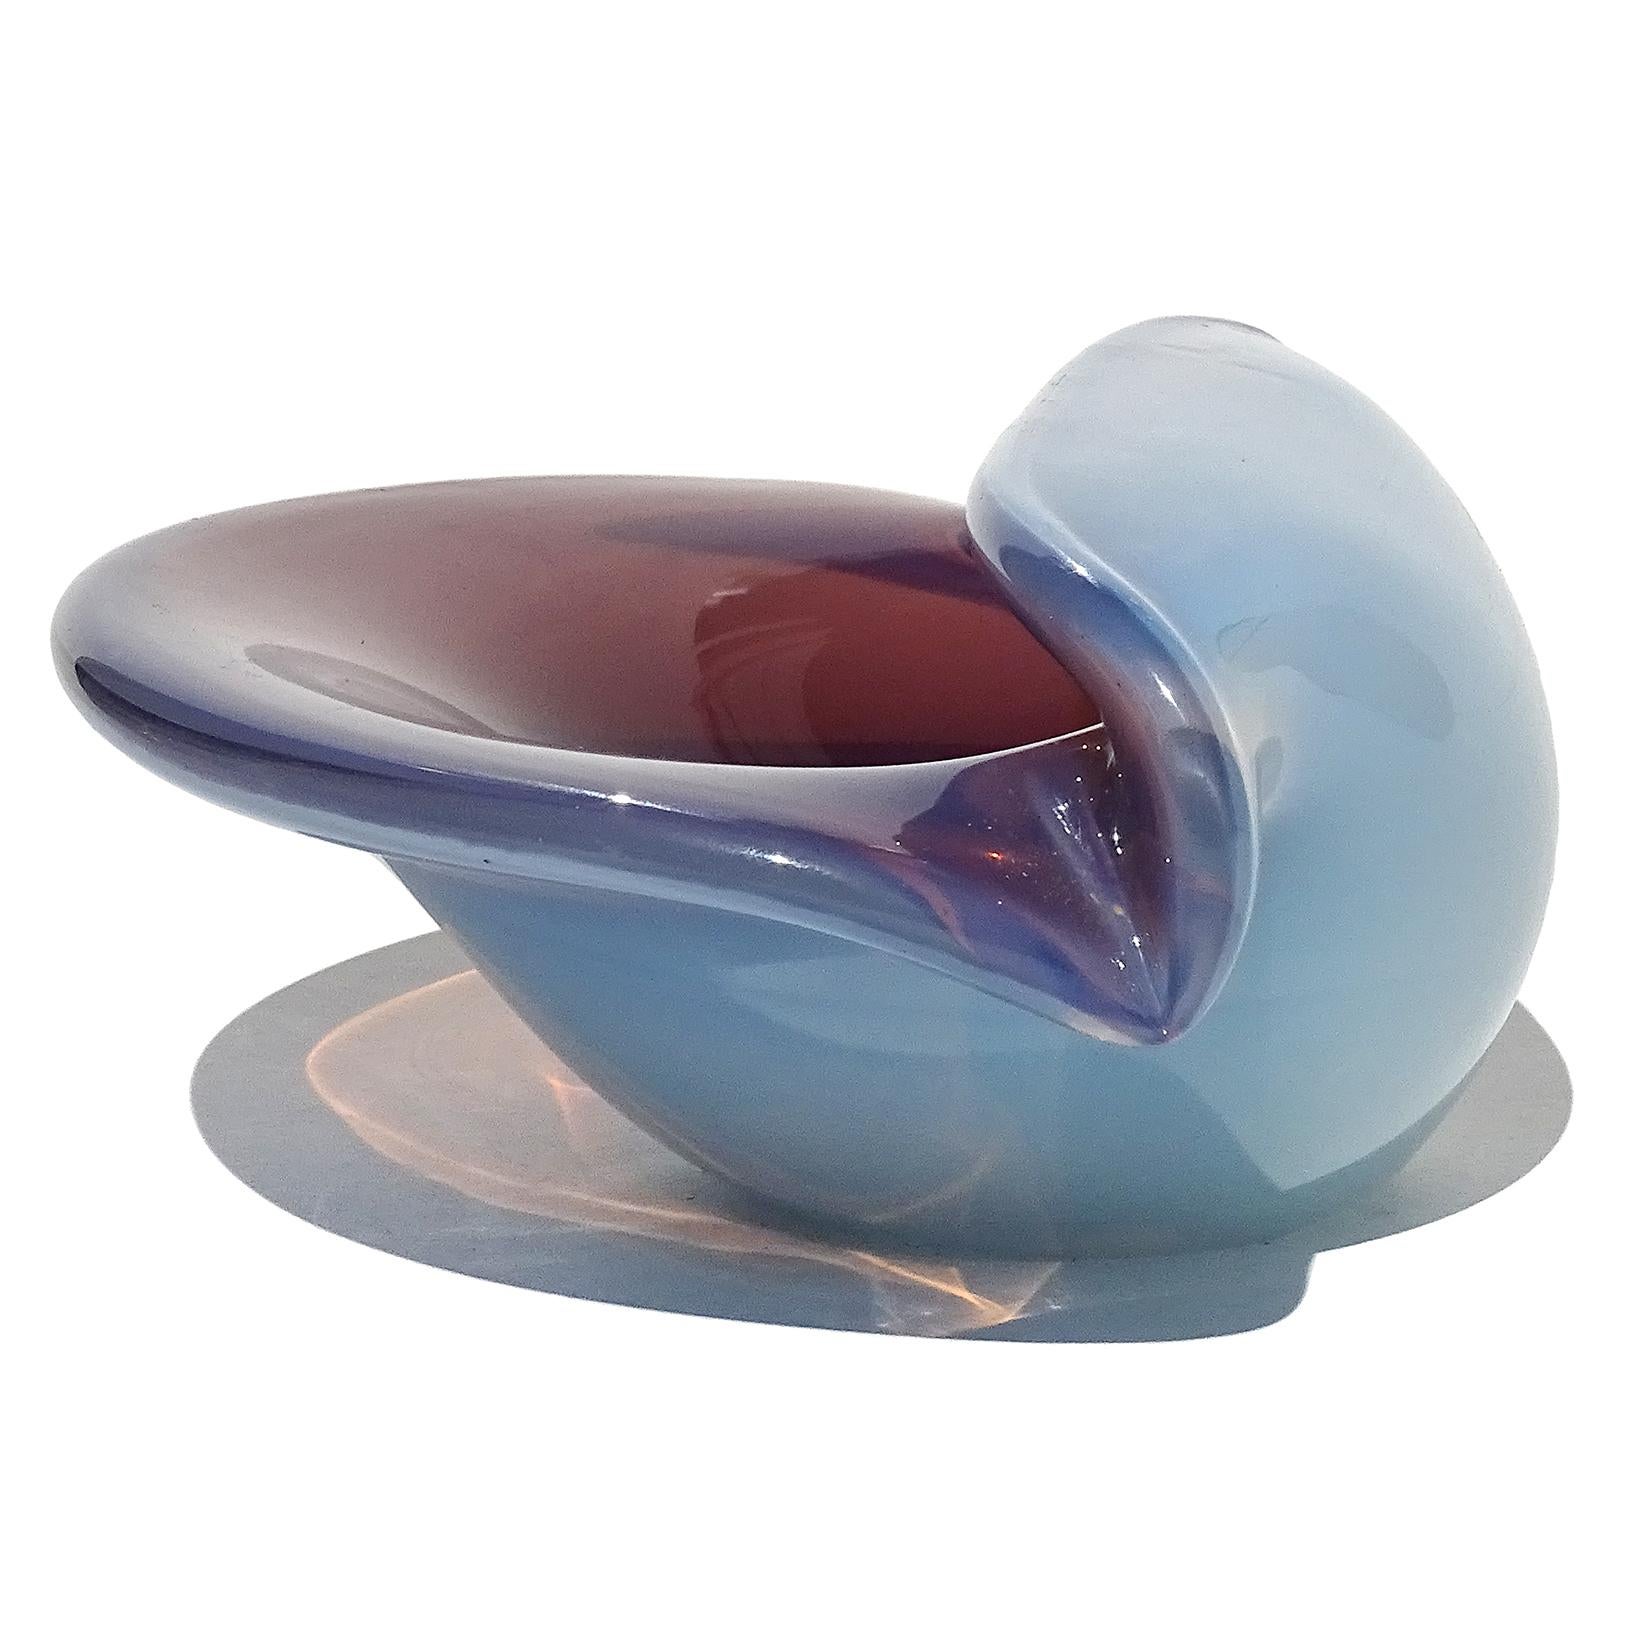 Beautiful vintage Murano hand blown opalescent white and purple Italian art glass clam shell decorative bowl. Documented to the Cenedese Company. Would make a great display piece on any vanity or desk. The seashell could be used as a catchall,